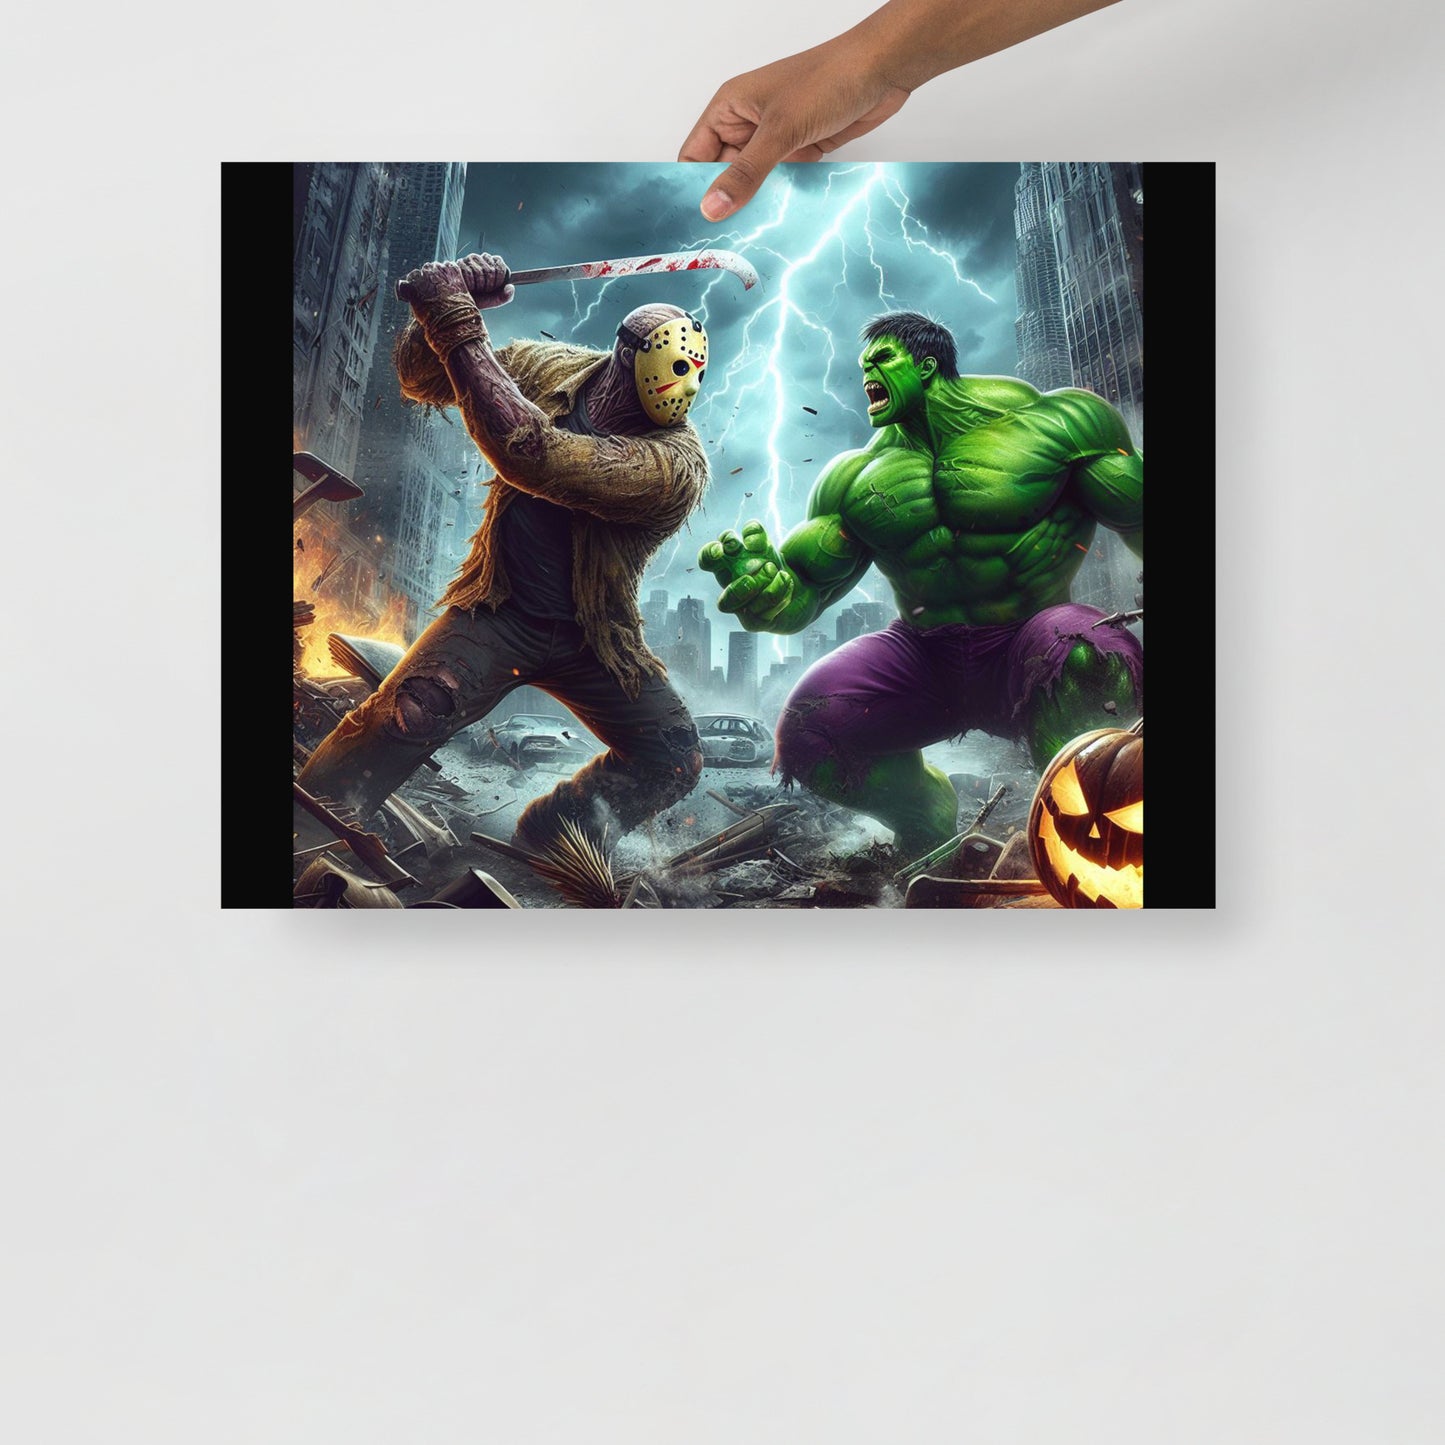 Jason Voorhees vs The Hulk Poster - Clash of the Unstoppable Titans